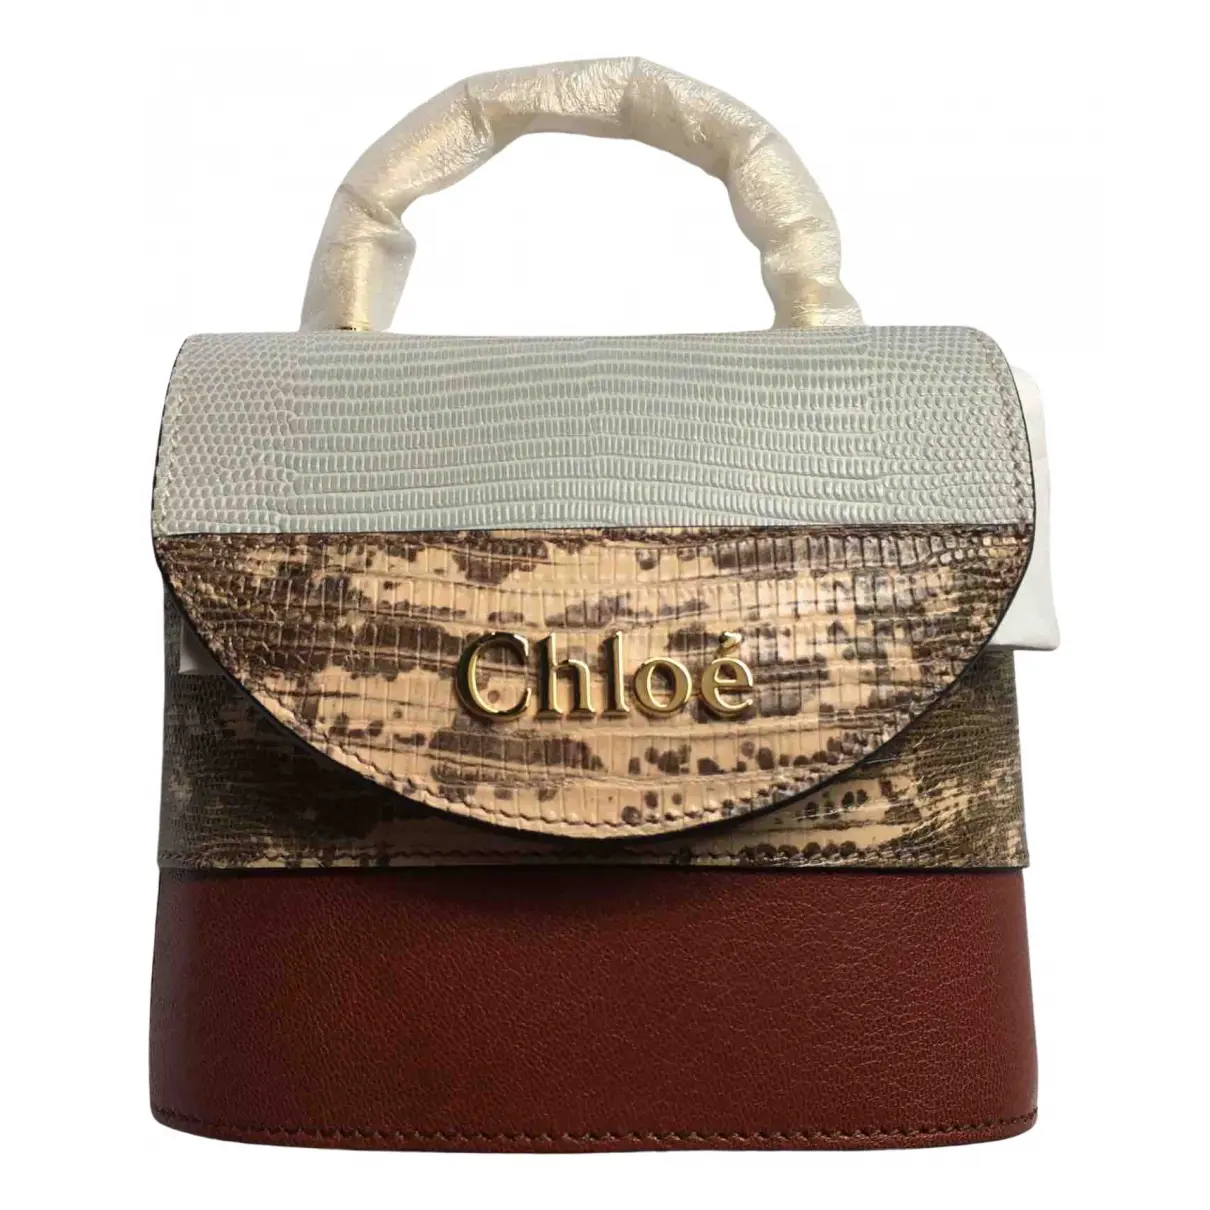 Aby leather bag Chloé